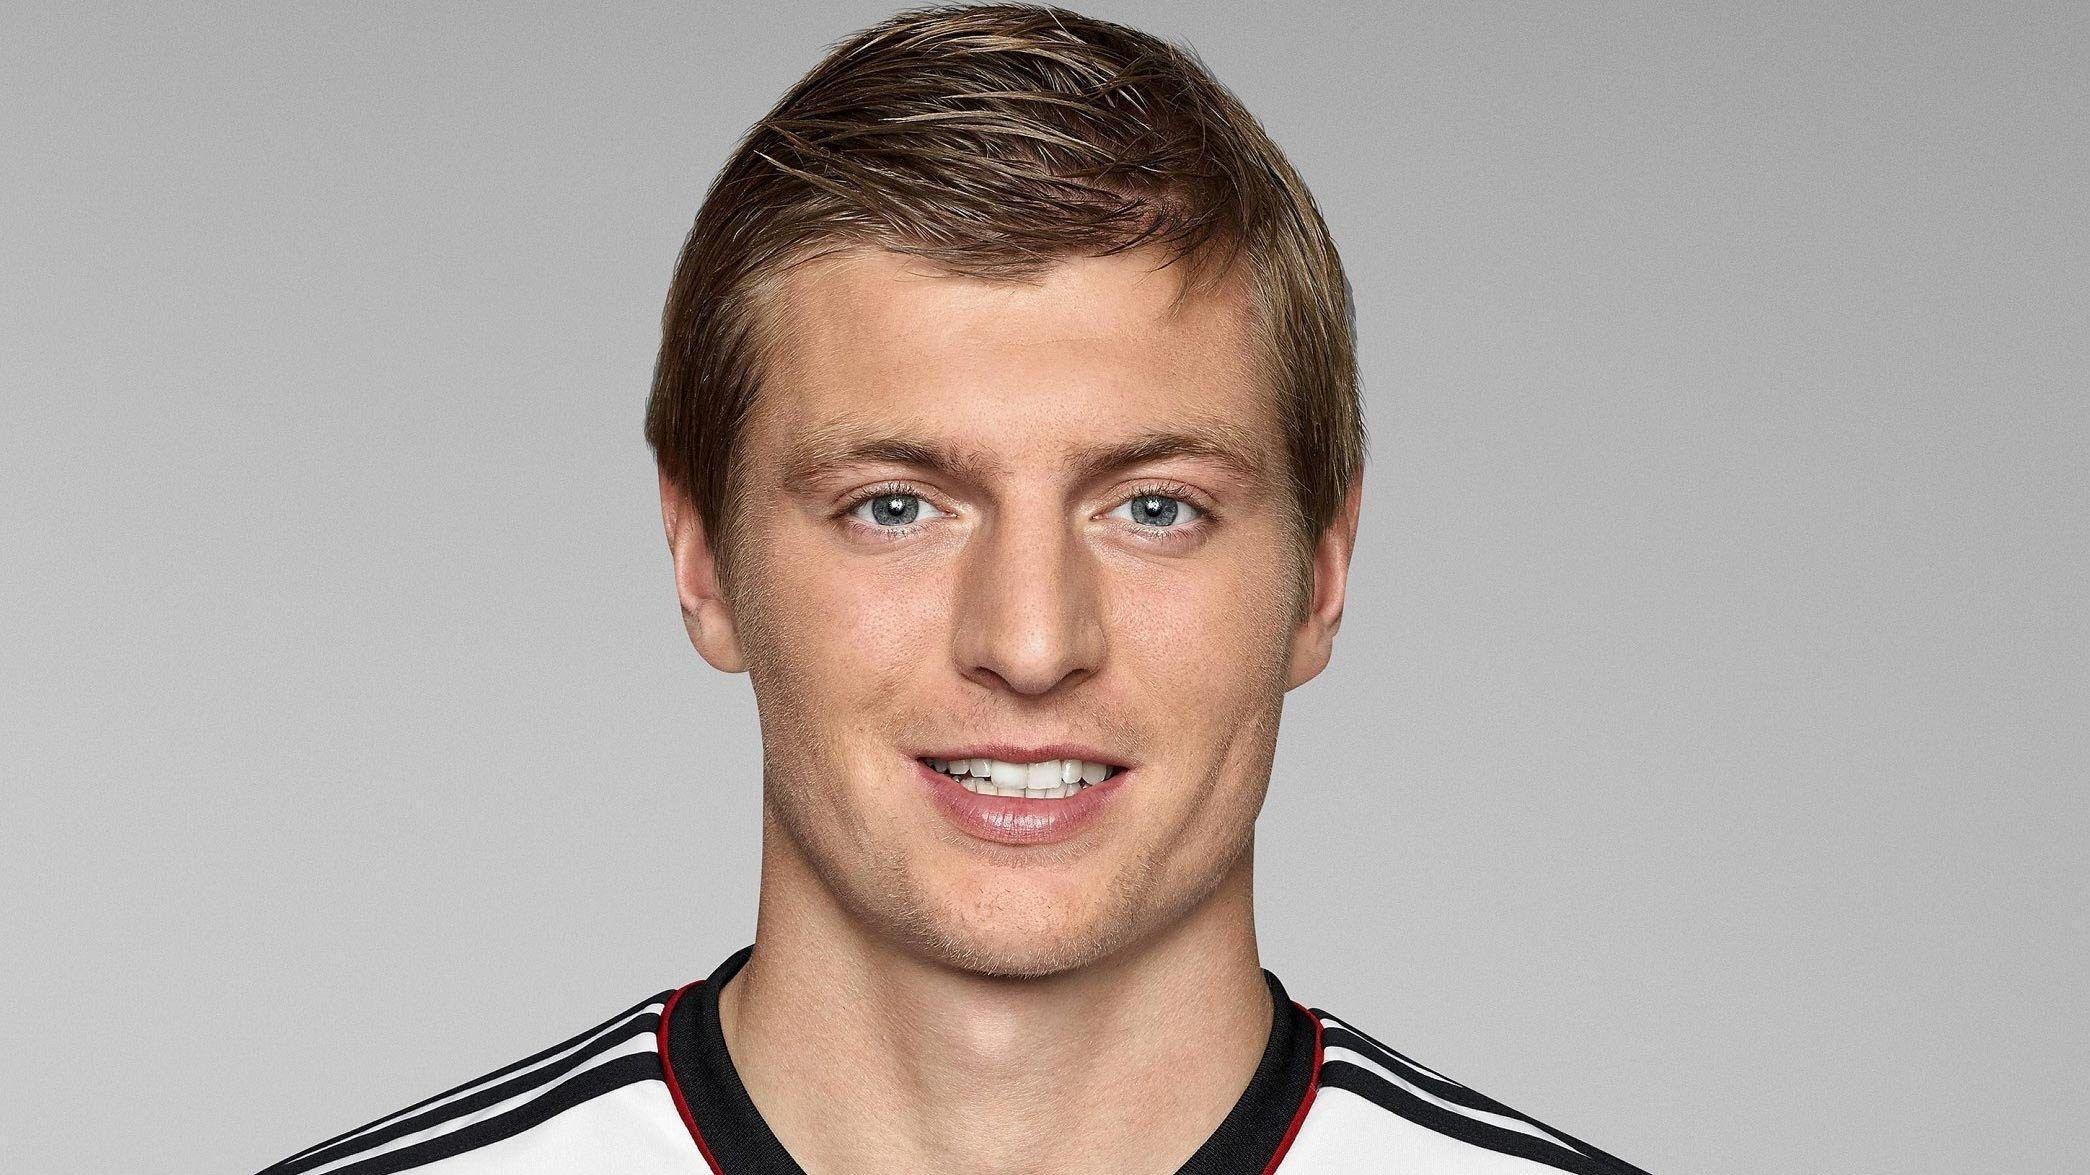 Toni Kroos Wallpaper Image Photo Picture Background